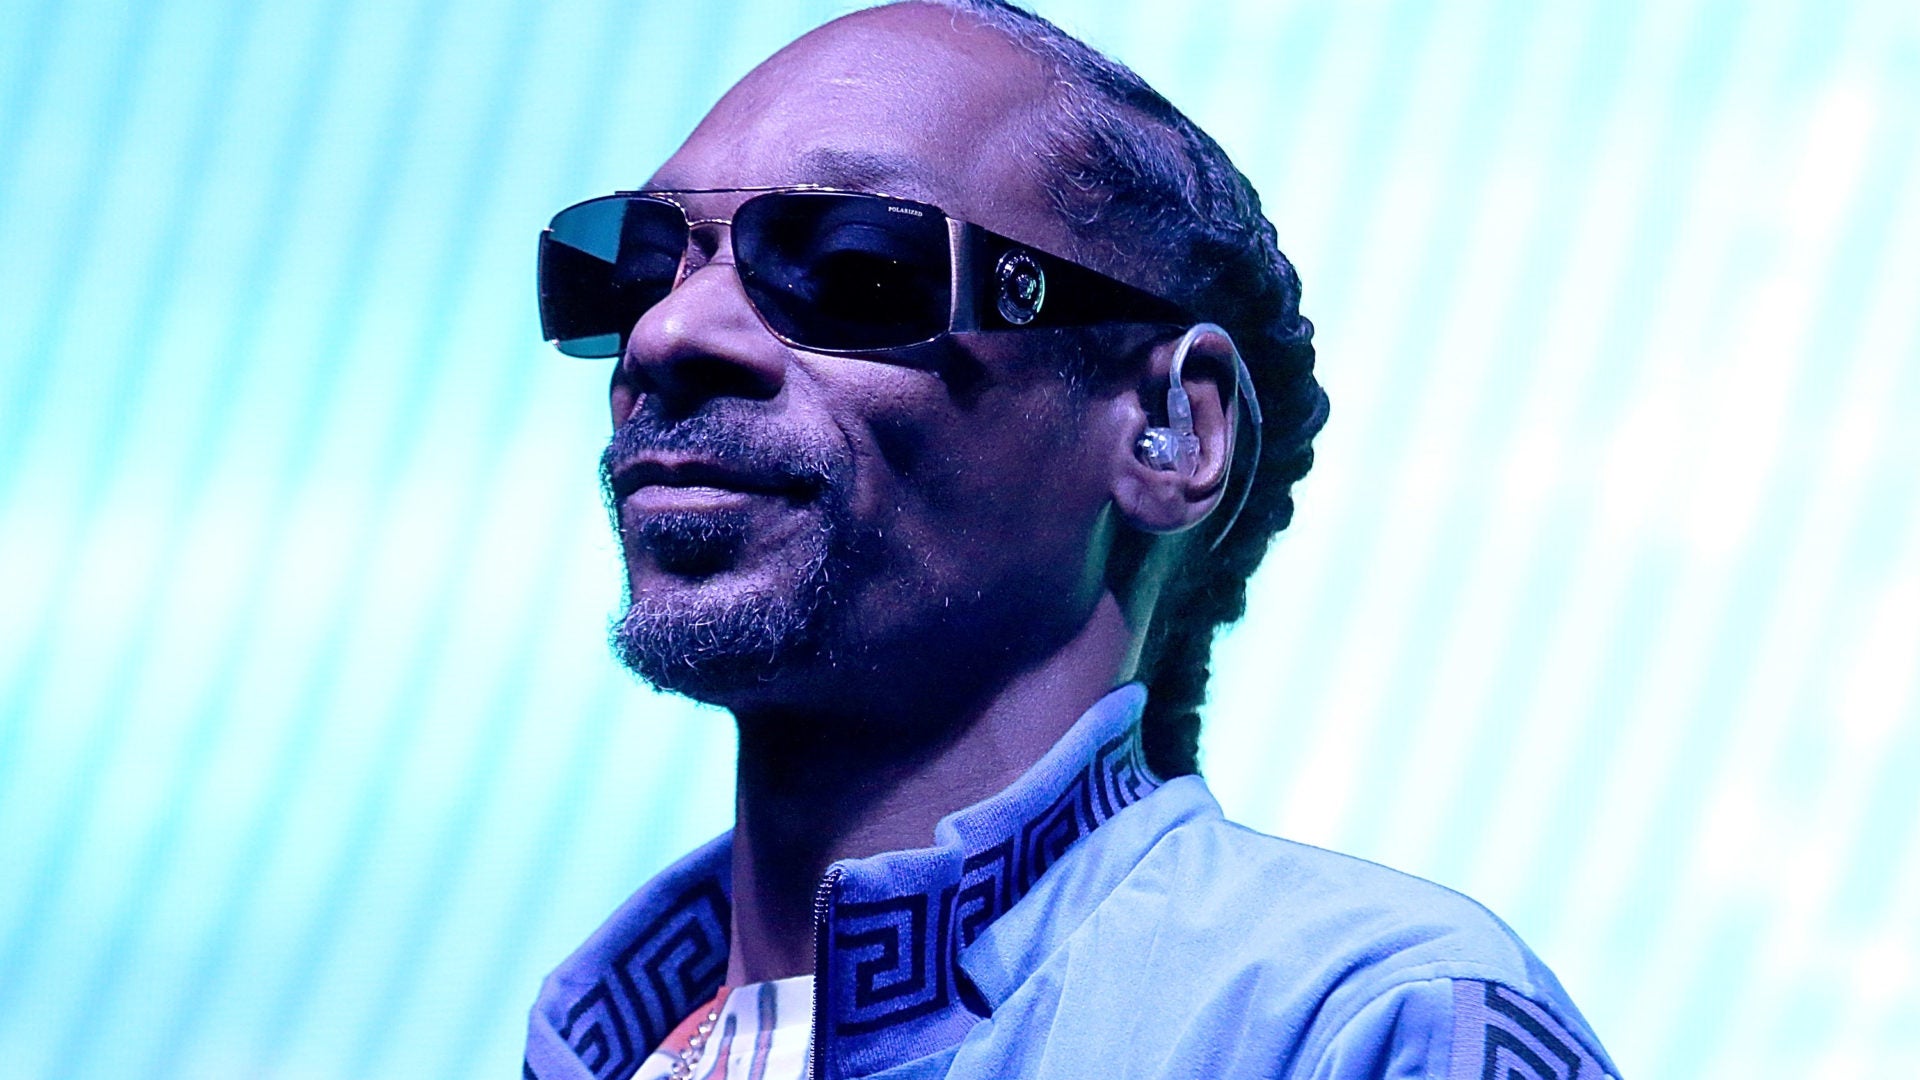 Snoop Dogg Reveals How He Felt After Gayle King Rant: 'I Had Too Much Power'